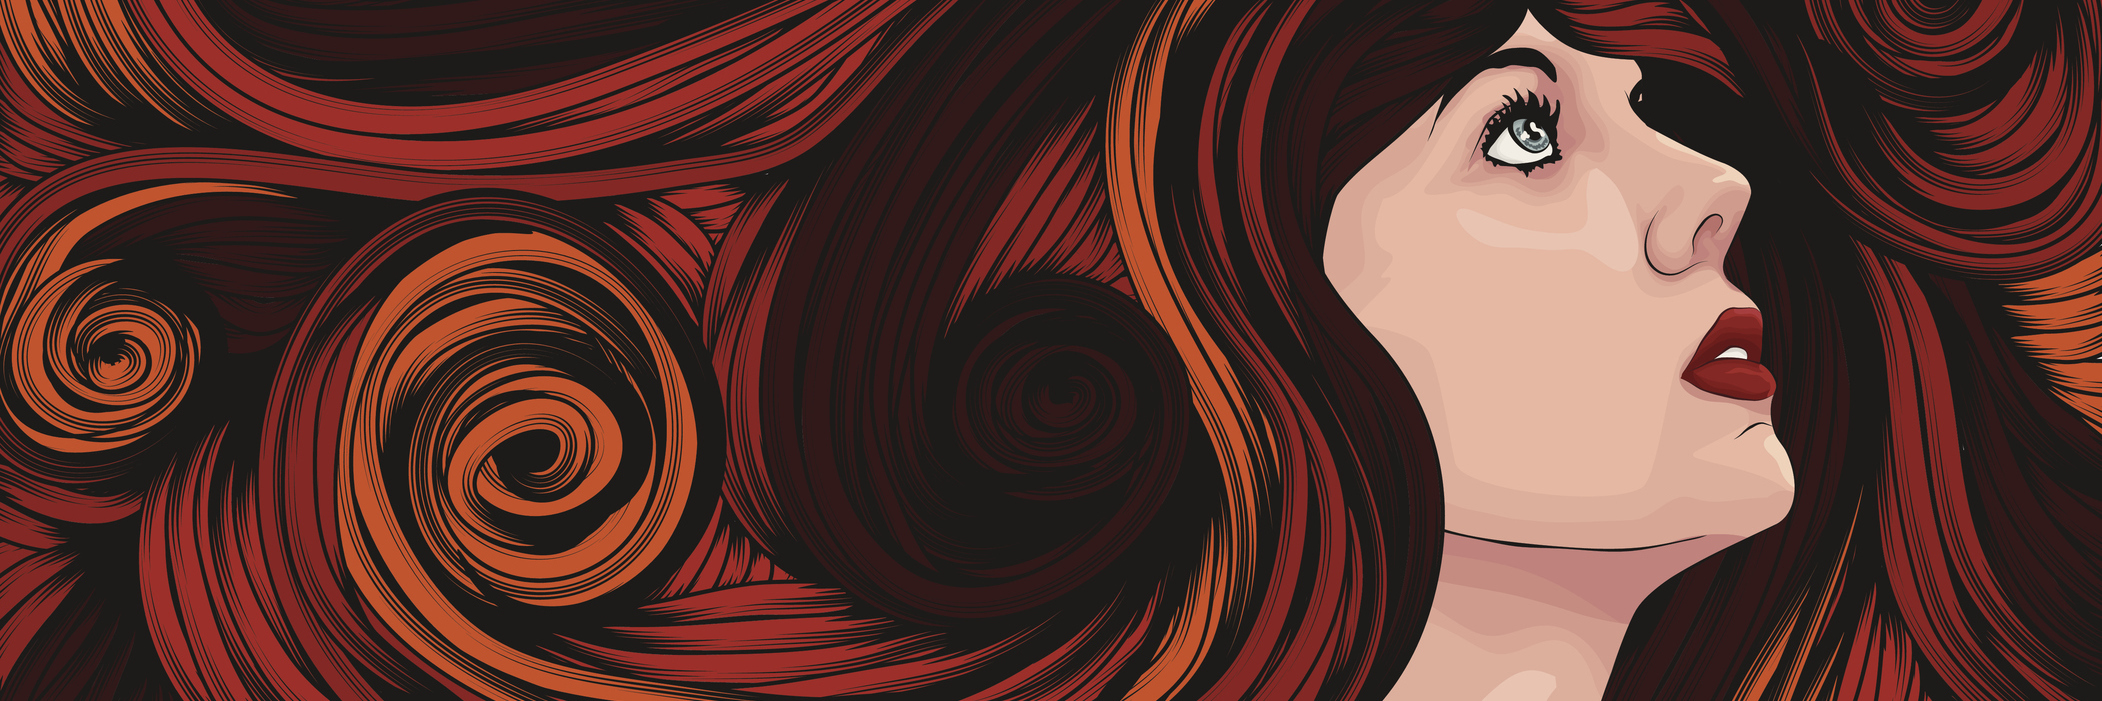 Beautiful woman looking up with long curly hair. Face and hair are on separate layers. Each hair strand is individual object. Cropped via clipping mask. Extra folder includes Illustrator CS2 AI and PDF files.